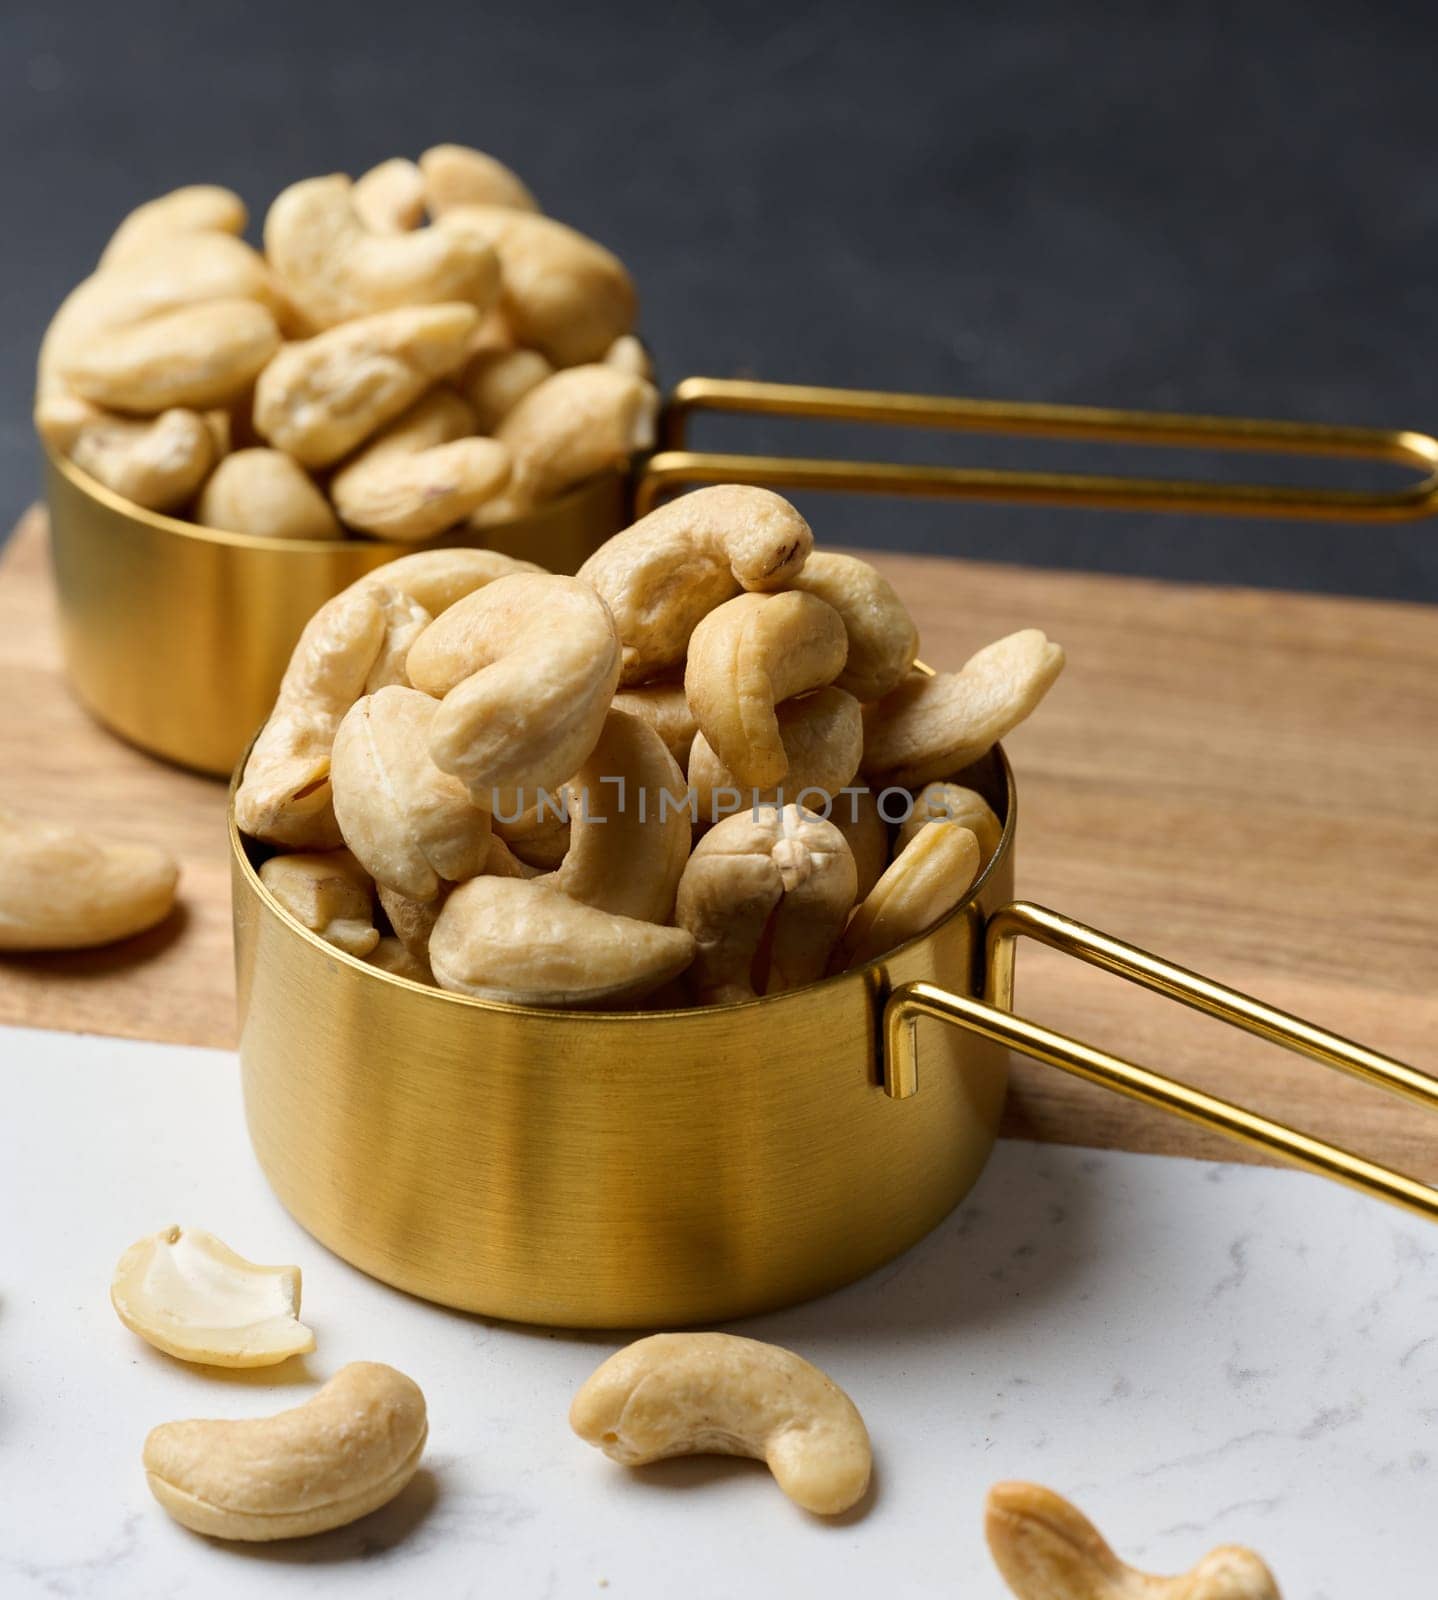 Cashews in a metal bowl on the table by ndanko